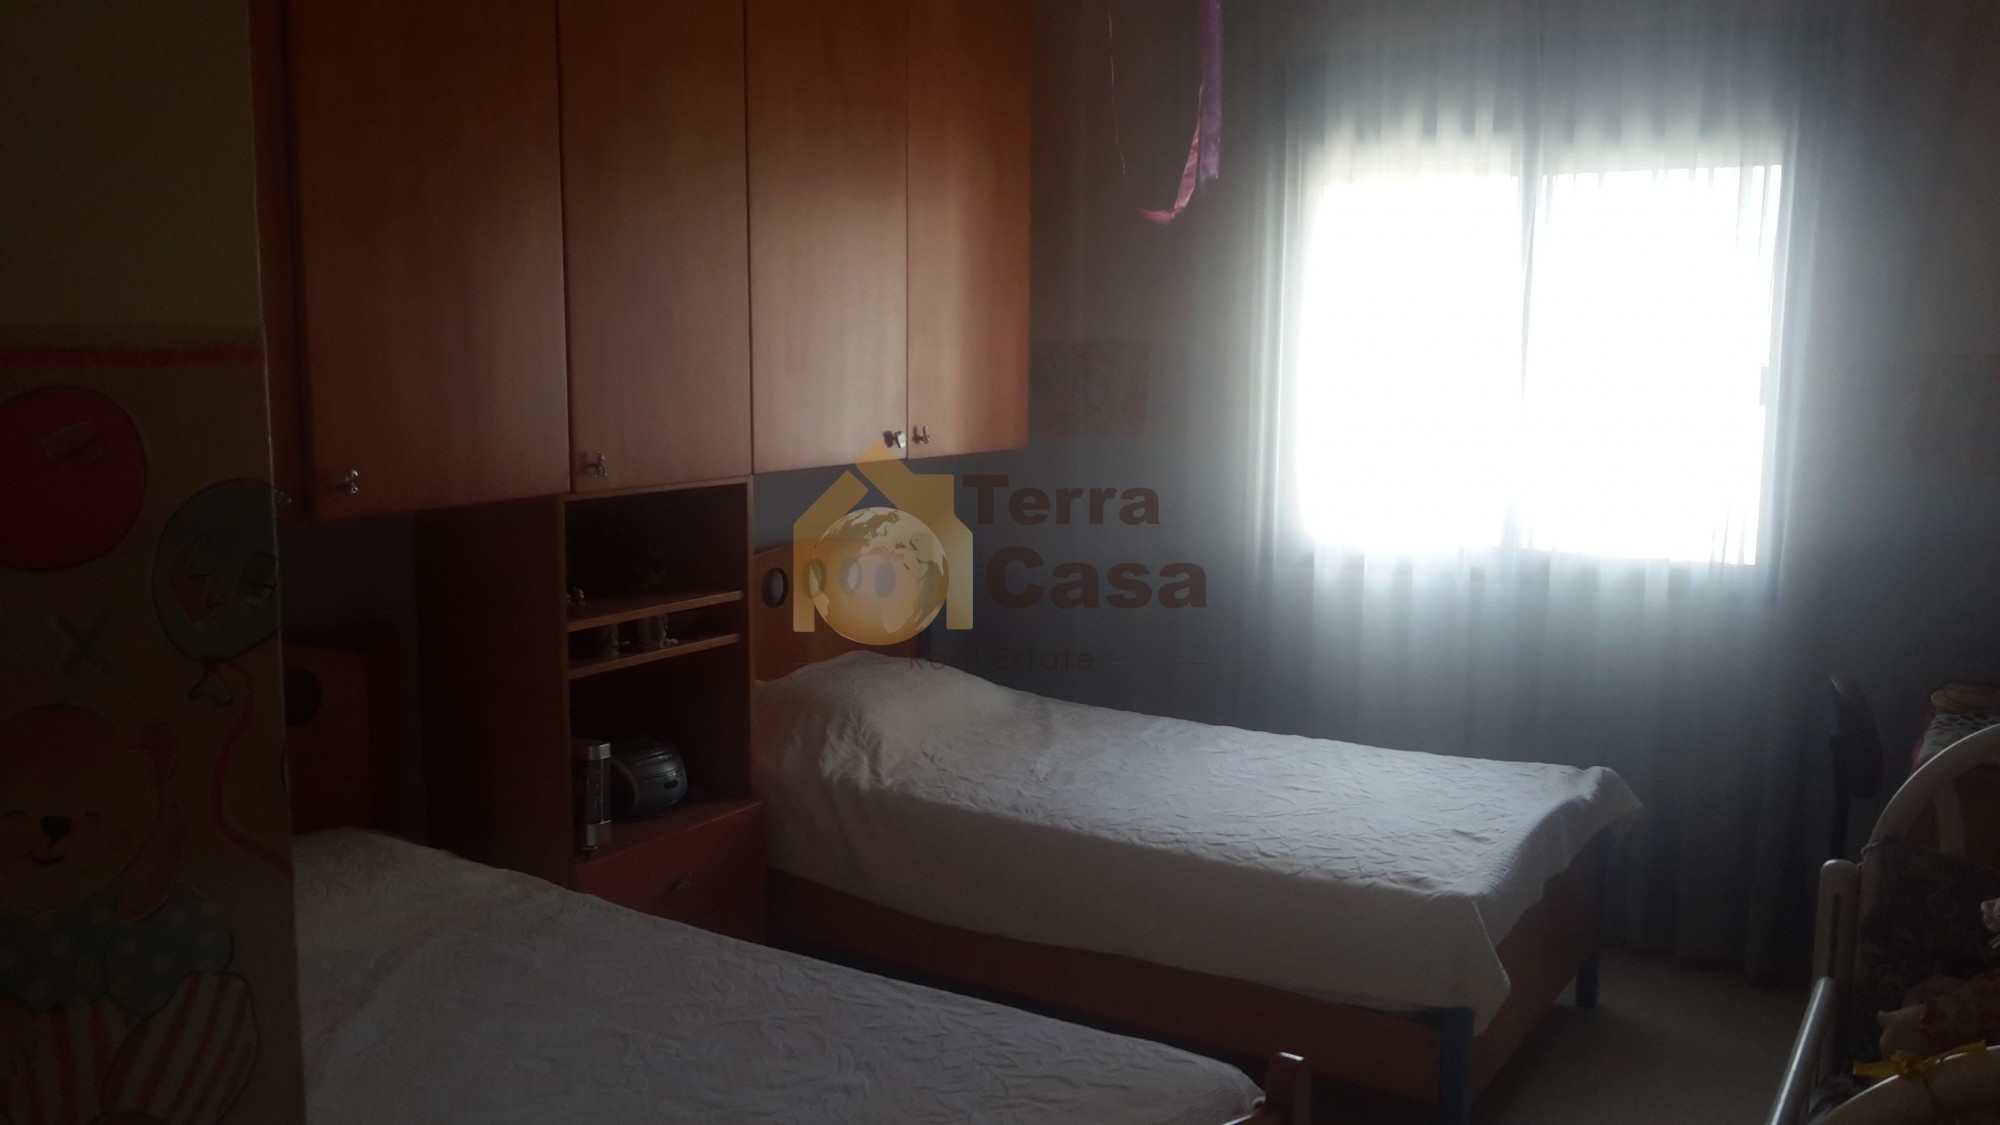 Sabtieh fully furnished apartment in a prime location .